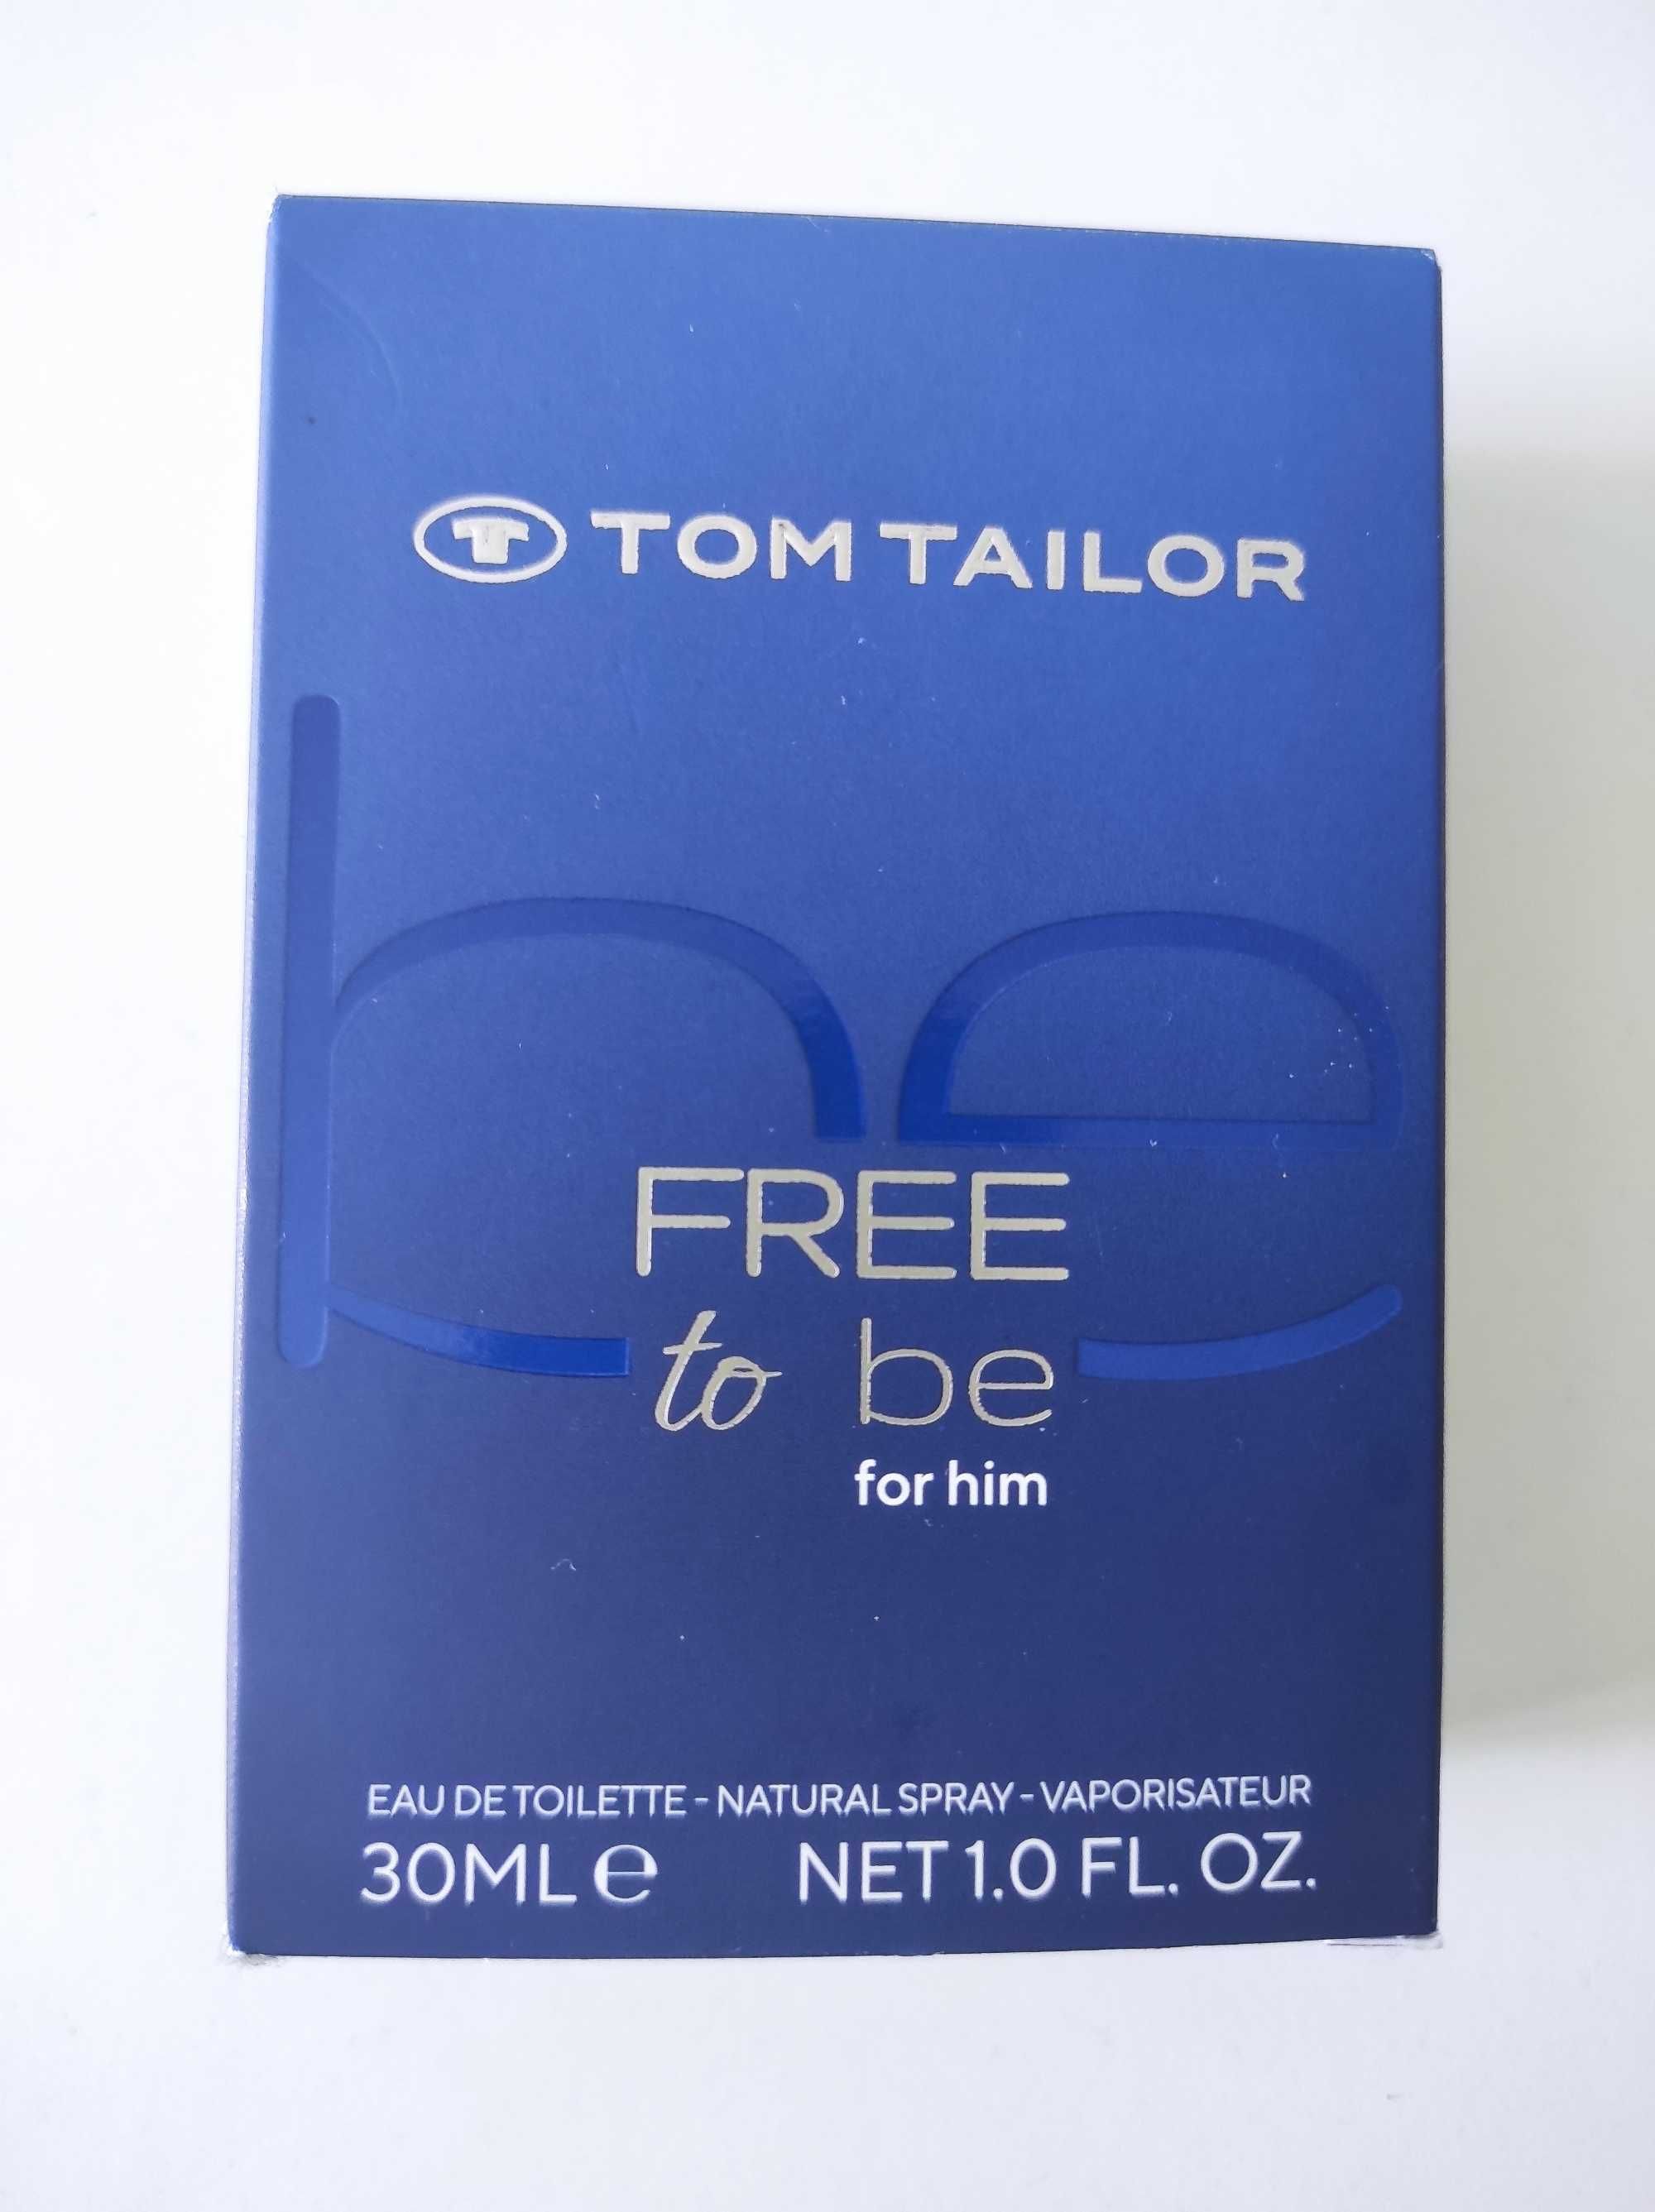 TOM TAILOR Free To Be for Him